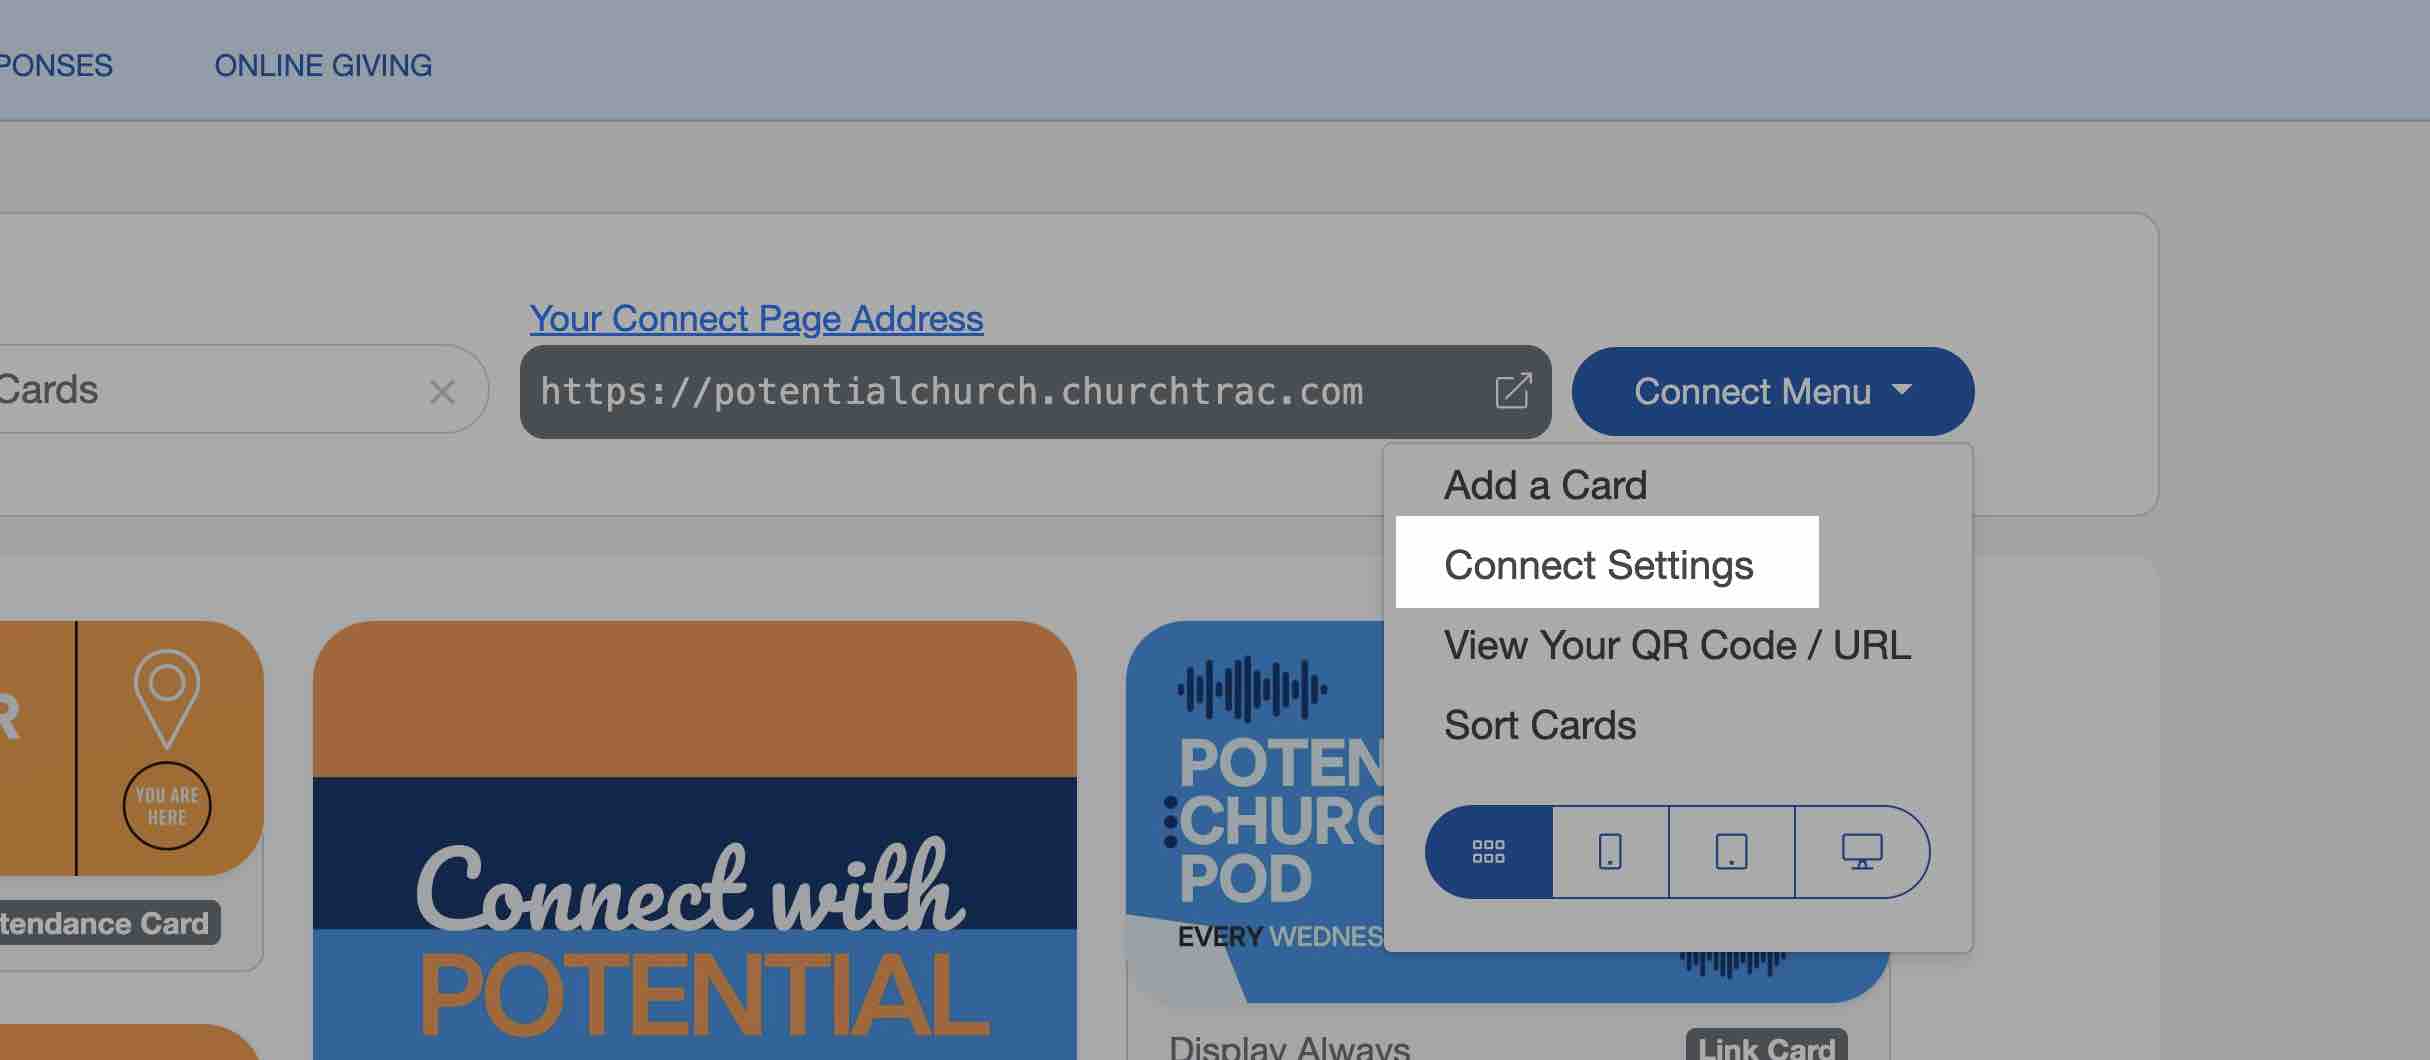 Customize the settings of your church app